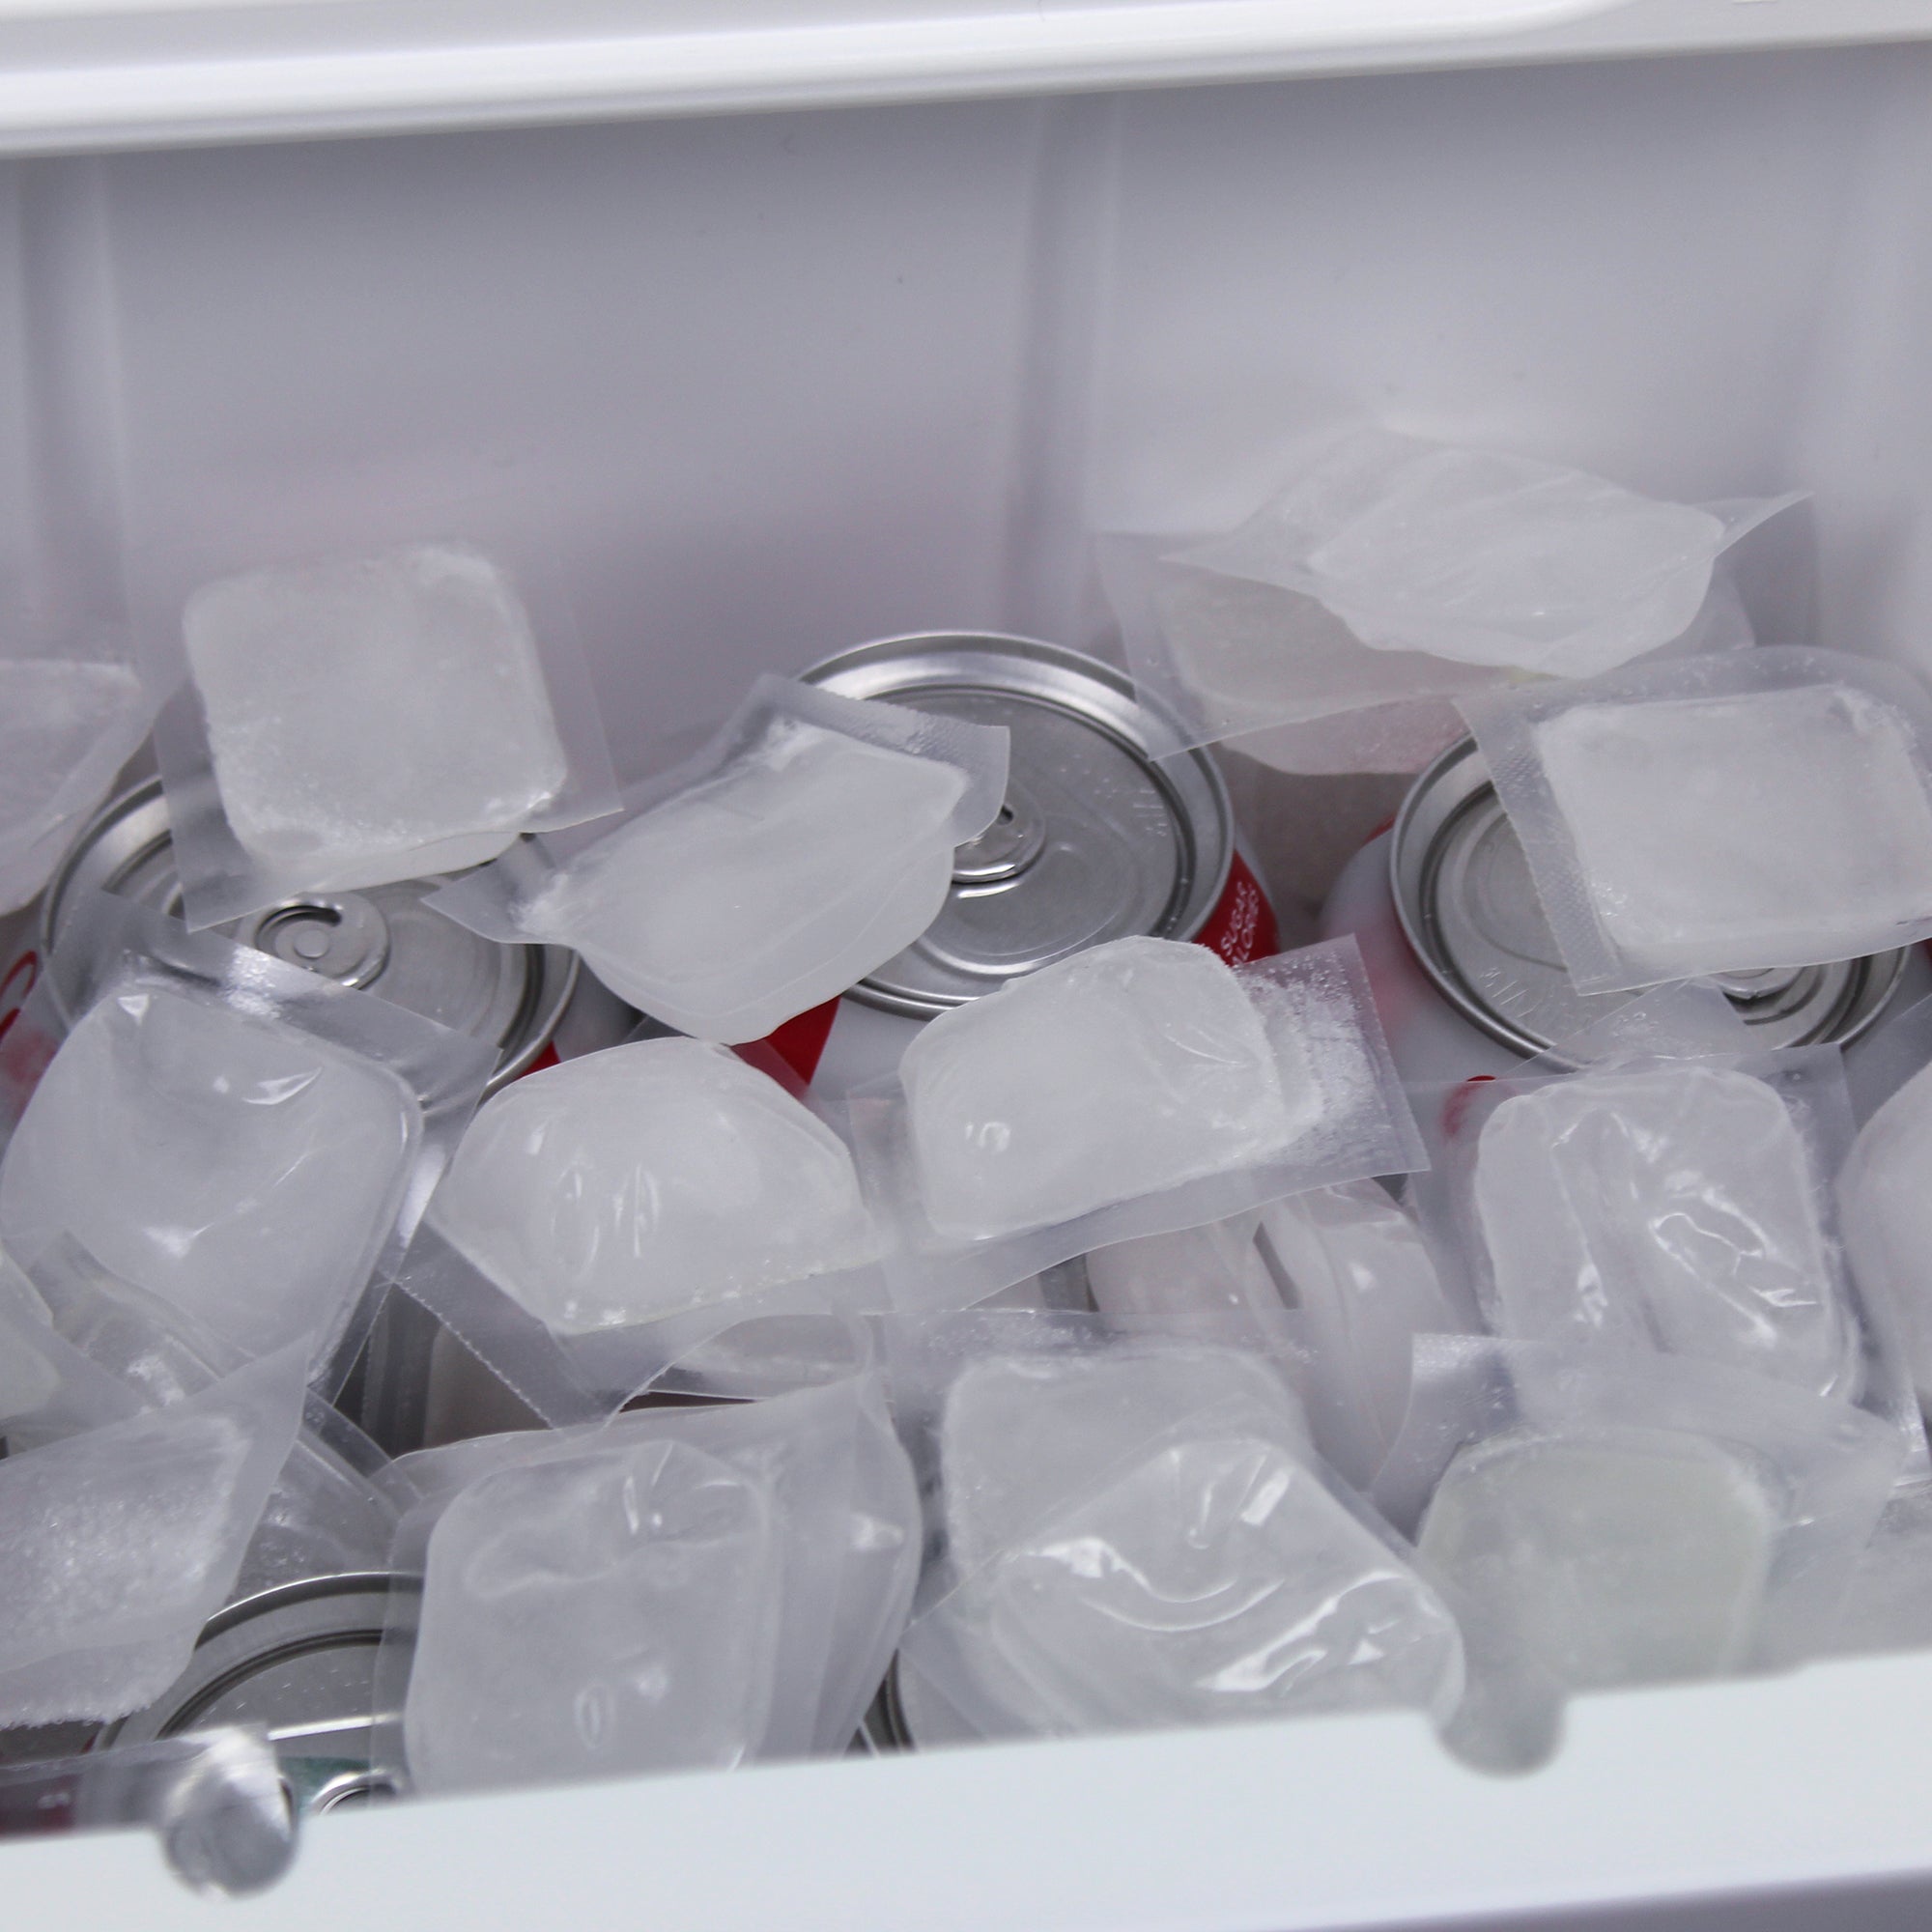 Cooler Cubes Bag of Ice - Reusable Refreezable Eco Friendly Ice Cubes